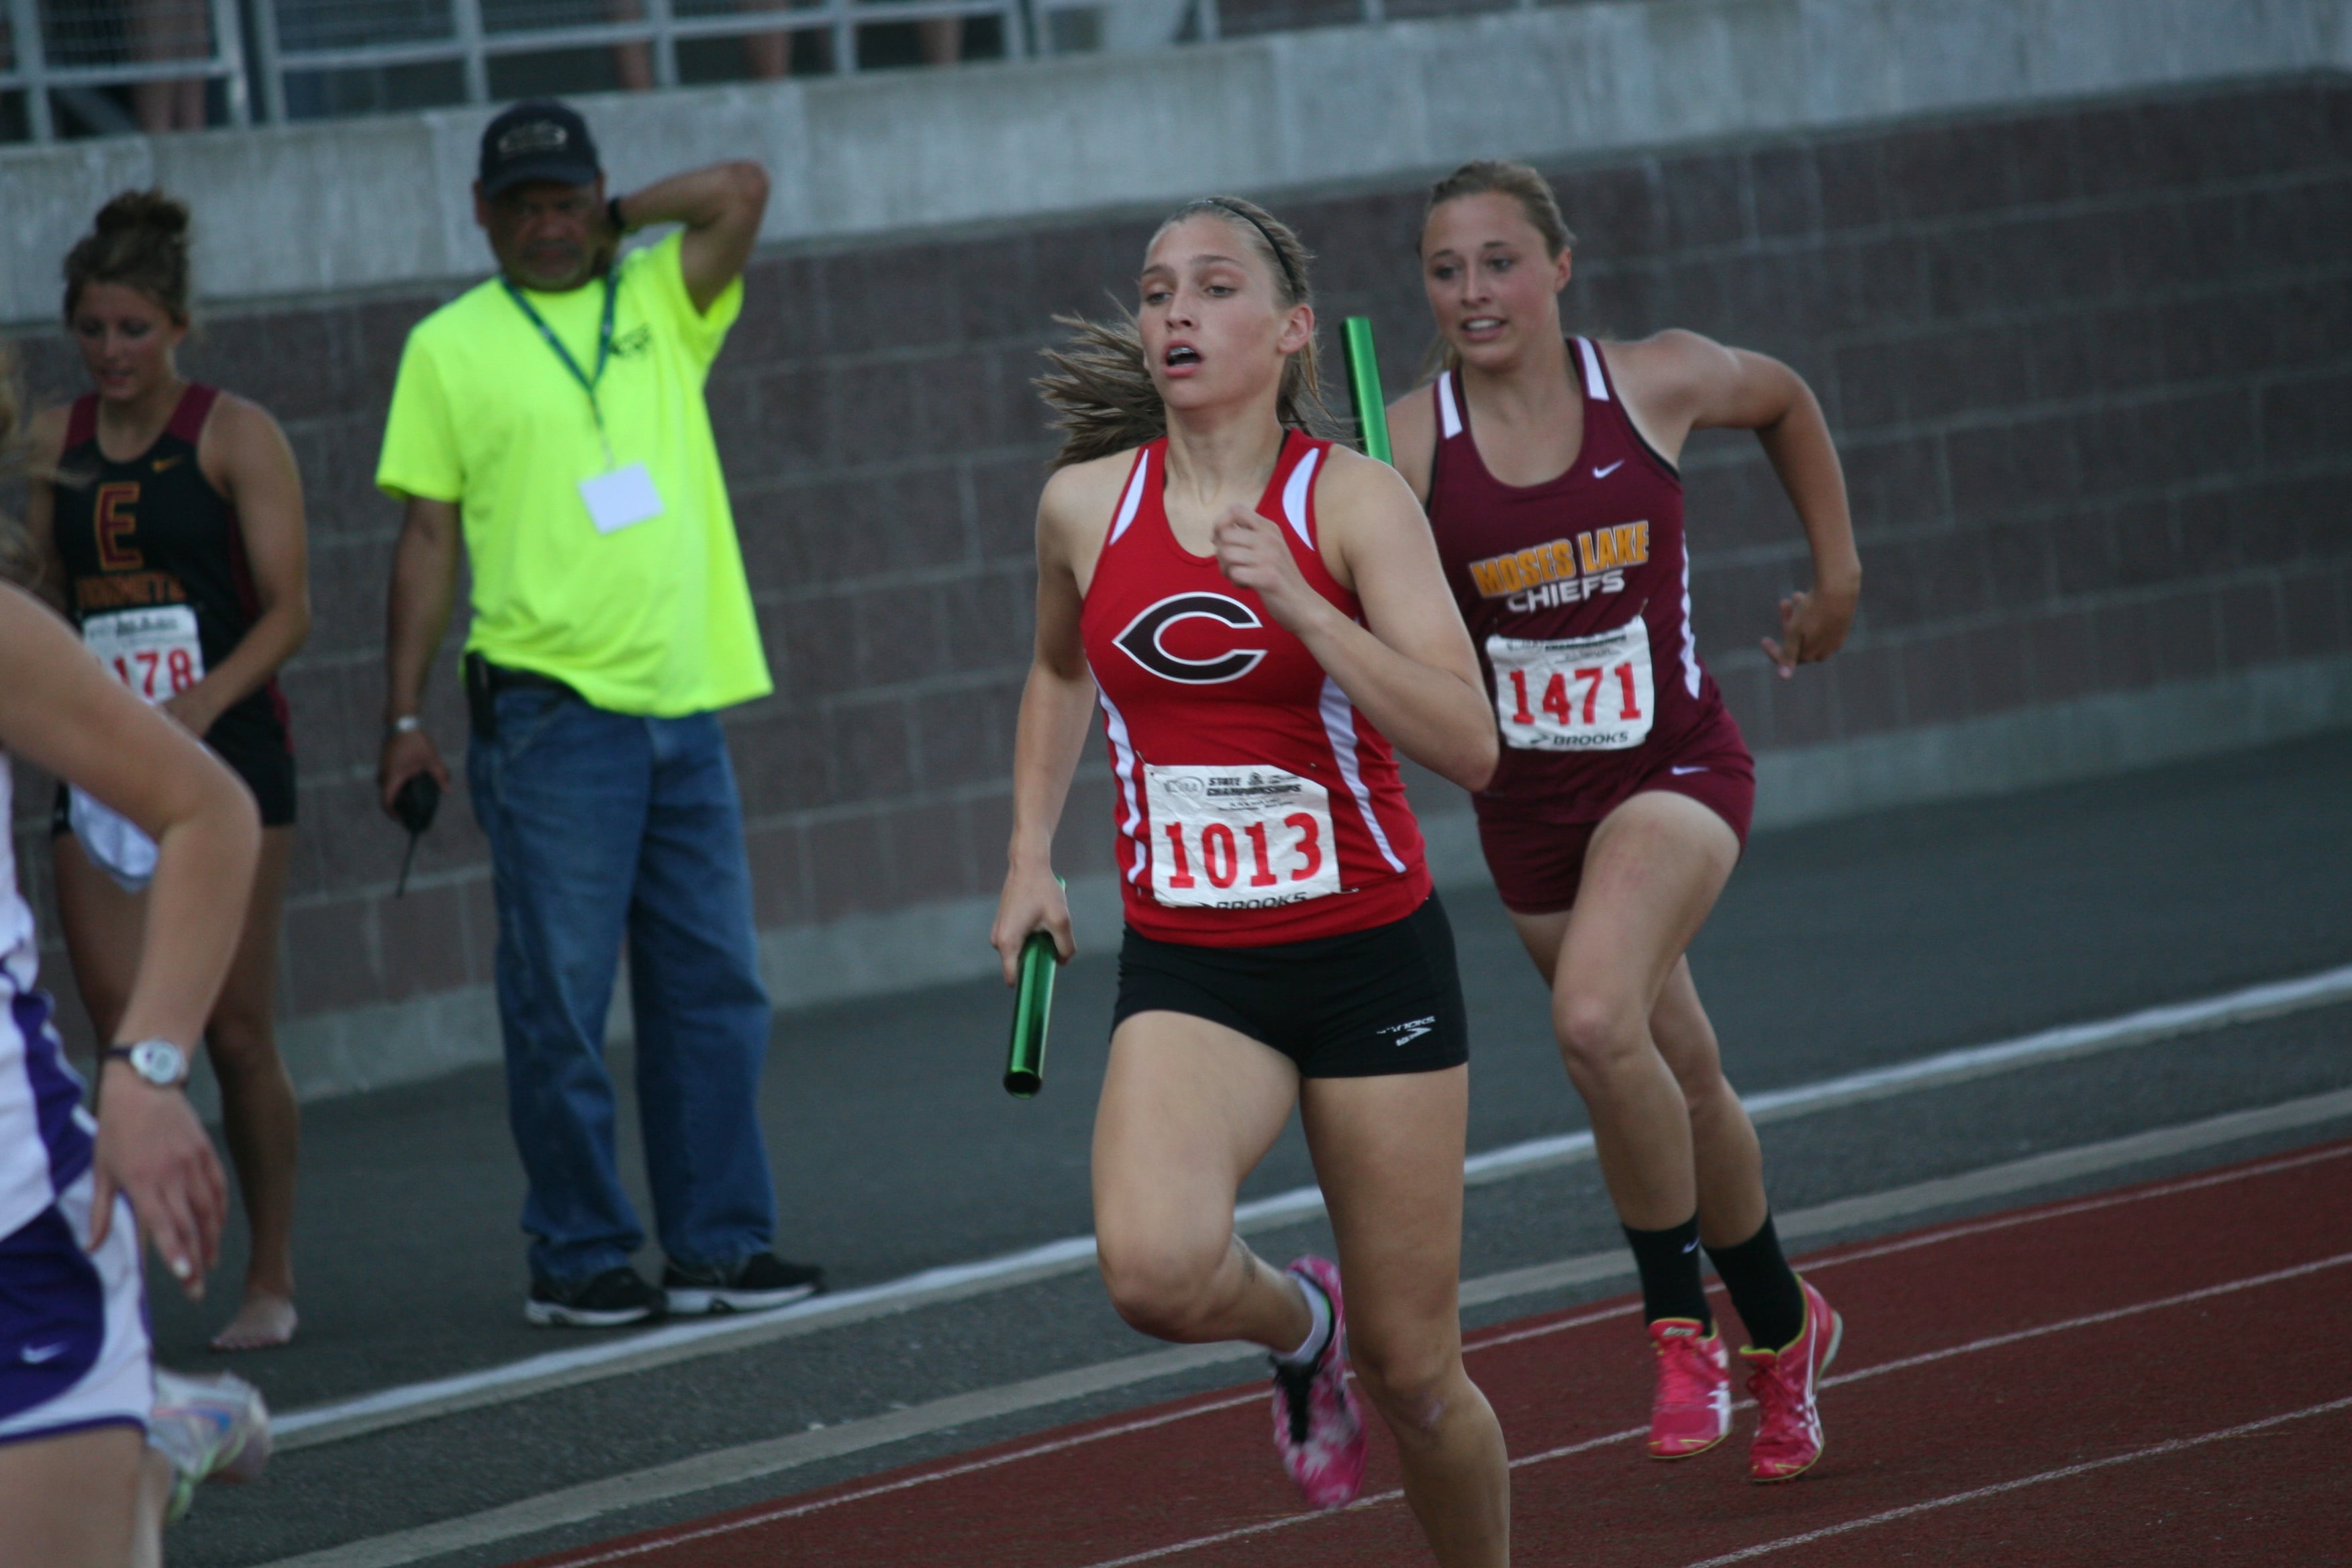 Meghan Finley picks up the pace for the Papermakers in the third leg of the 1,600 relay.